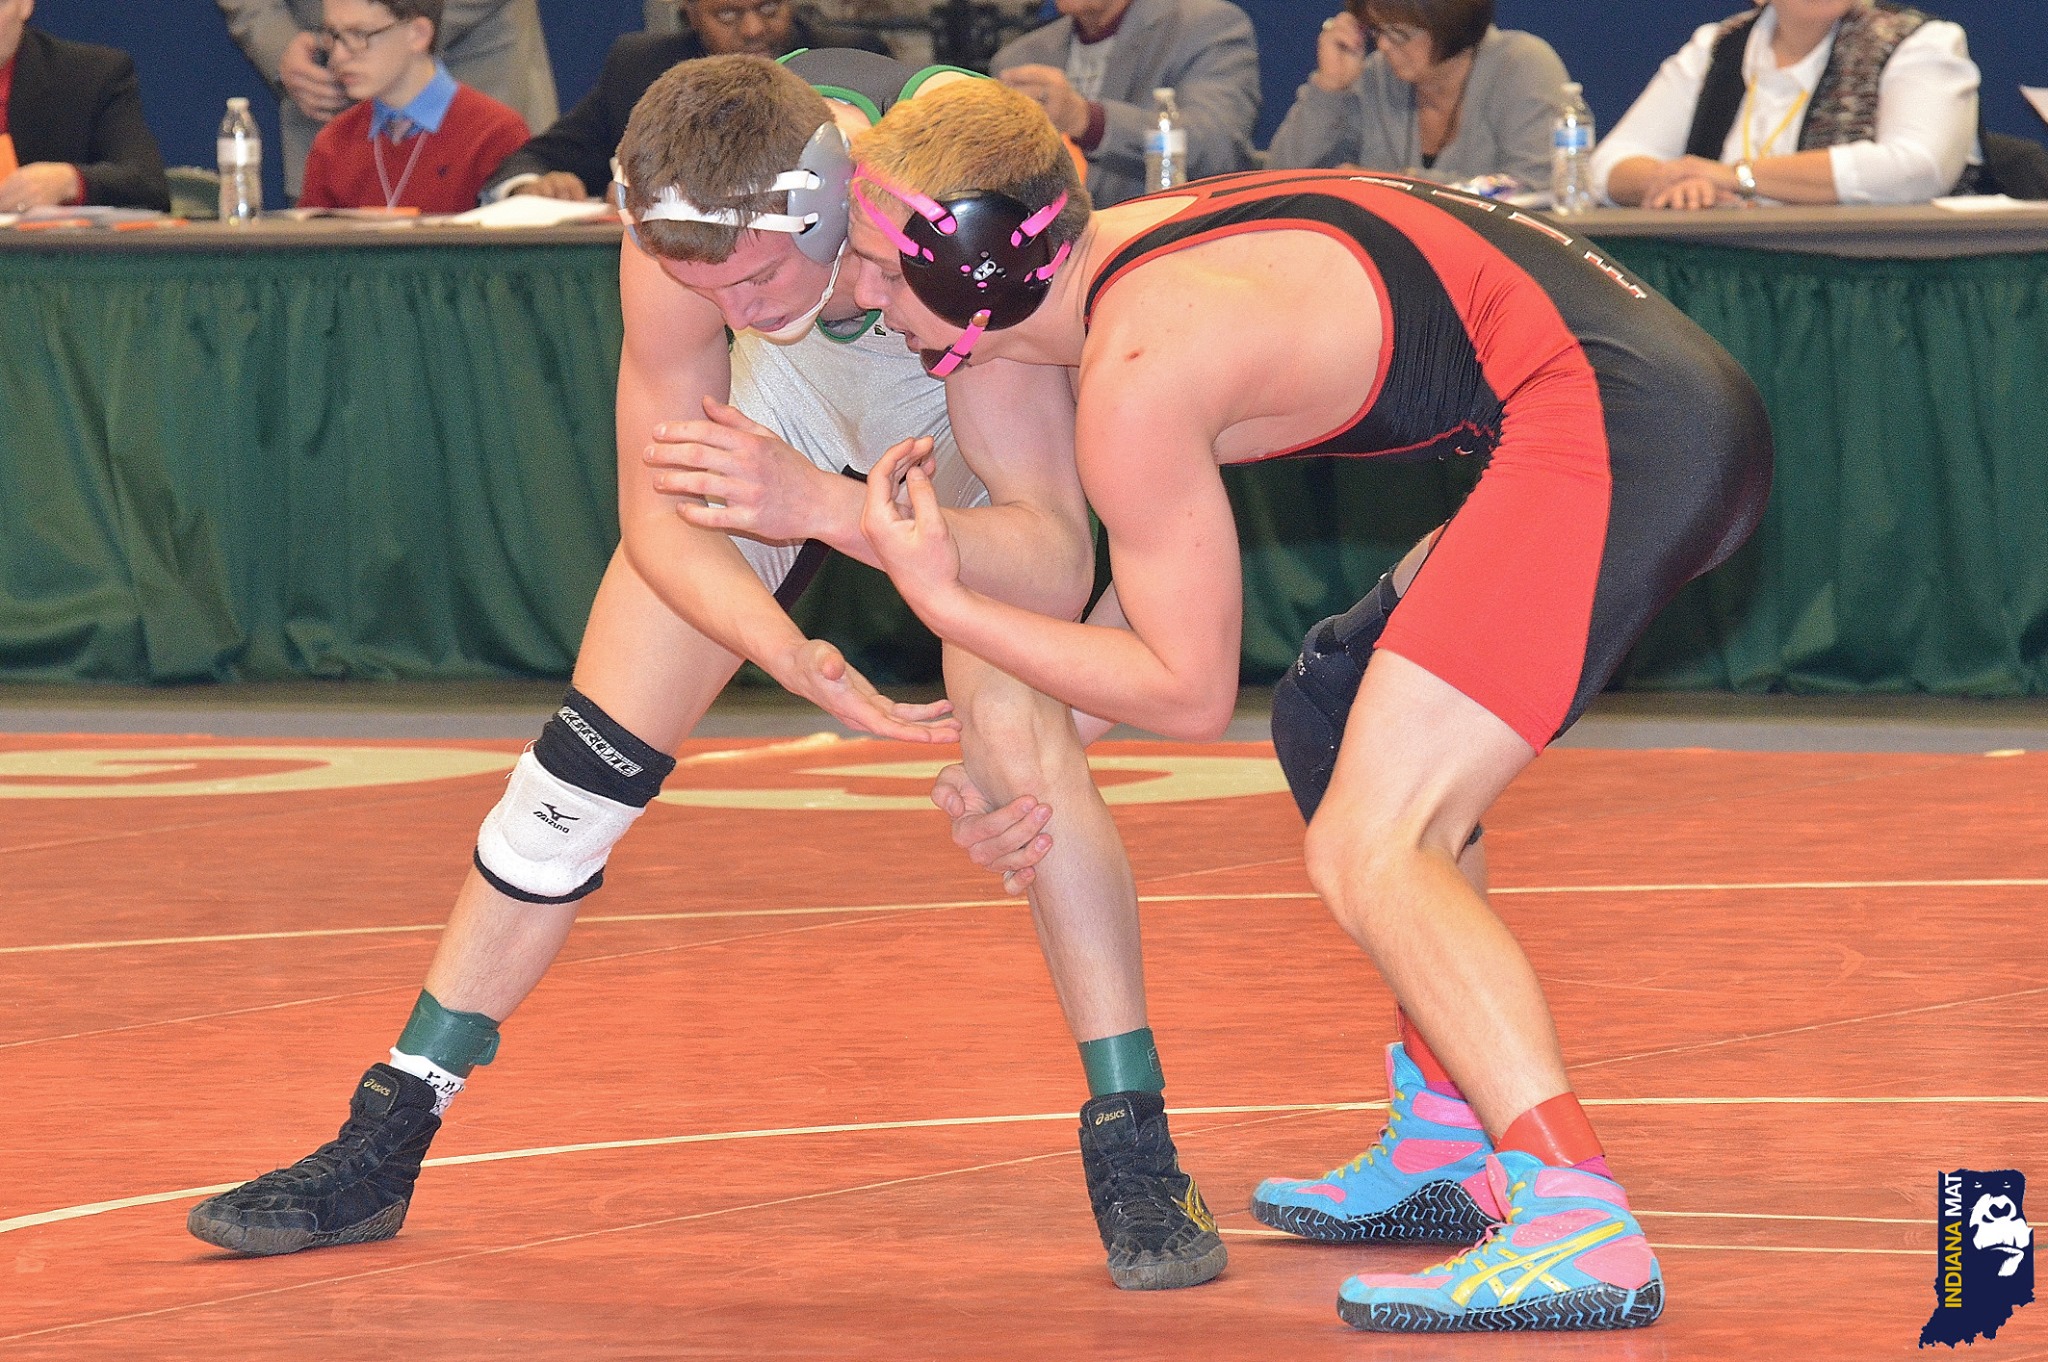 More information about "#WrestlingWednesday Feature: Bane Building Upon Last Year's Success"